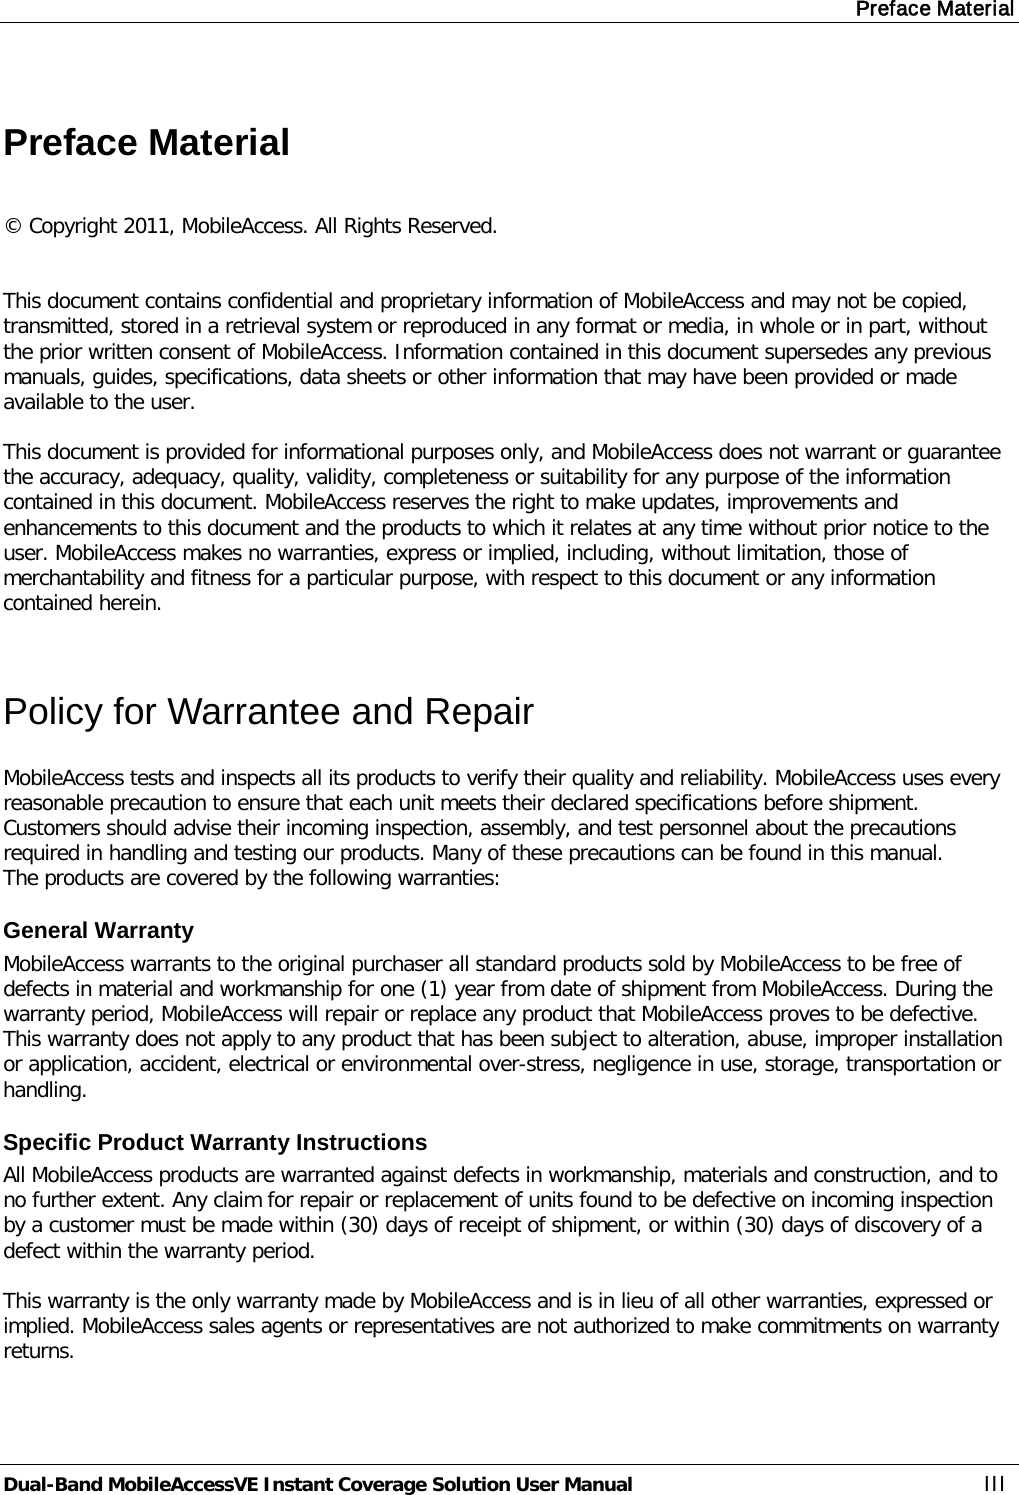 Preface Material Dual-Band MobileAccessVE Instant Coverage Solution User Manual III  Preface Material  © Copyright 2011, MobileAccess. All Rights Reserved.   This document contains confidential and proprietary information of MobileAccess and may not be copied, transmitted, stored in a retrieval system or reproduced in any format or media, in whole or in part, without the prior written consent of MobileAccess. Information contained in this document supersedes any previous manuals, guides, specifications, data sheets or other information that may have been provided or made available to the user.   This document is provided for informational purposes only, and MobileAccess does not warrant or guarantee the accuracy, adequacy, quality, validity, completeness or suitability for any purpose of the information contained in this document. MobileAccess reserves the right to make updates, improvements and enhancements to this document and the products to which it relates at any time without prior notice to the user. MobileAccess makes no warranties, express or implied, including, without limitation, those of merchantability and fitness for a particular purpose, with respect to this document or any information contained herein.  Policy for Warrantee and Repair MobileAccess tests and inspects all its products to verify their quality and reliability. MobileAccess uses every reasonable precaution to ensure that each unit meets their declared specifications before shipment. Customers should advise their incoming inspection, assembly, and test personnel about the precautions required in handling and testing our products. Many of these precautions can be found in this manual. The products are covered by the following warranties: General Warranty MobileAccess warrants to the original purchaser all standard products sold by MobileAccess to be free of defects in material and workmanship for one (1) year from date of shipment from MobileAccess. During the warranty period, MobileAccess will repair or replace any product that MobileAccess proves to be defective. This warranty does not apply to any product that has been subject to alteration, abuse, improper installation or application, accident, electrical or environmental over-stress, negligence in use, storage, transportation or handling. Specific Product Warranty Instructions All MobileAccess products are warranted against defects in workmanship, materials and construction, and to no further extent. Any claim for repair or replacement of units found to be defective on incoming inspection by a customer must be made within (30) days of receipt of shipment, or within (30) days of discovery of a defect within the warranty period.  This warranty is the only warranty made by MobileAccess and is in lieu of all other warranties, expressed or implied. MobileAccess sales agents or representatives are not authorized to make commitments on warranty returns. 